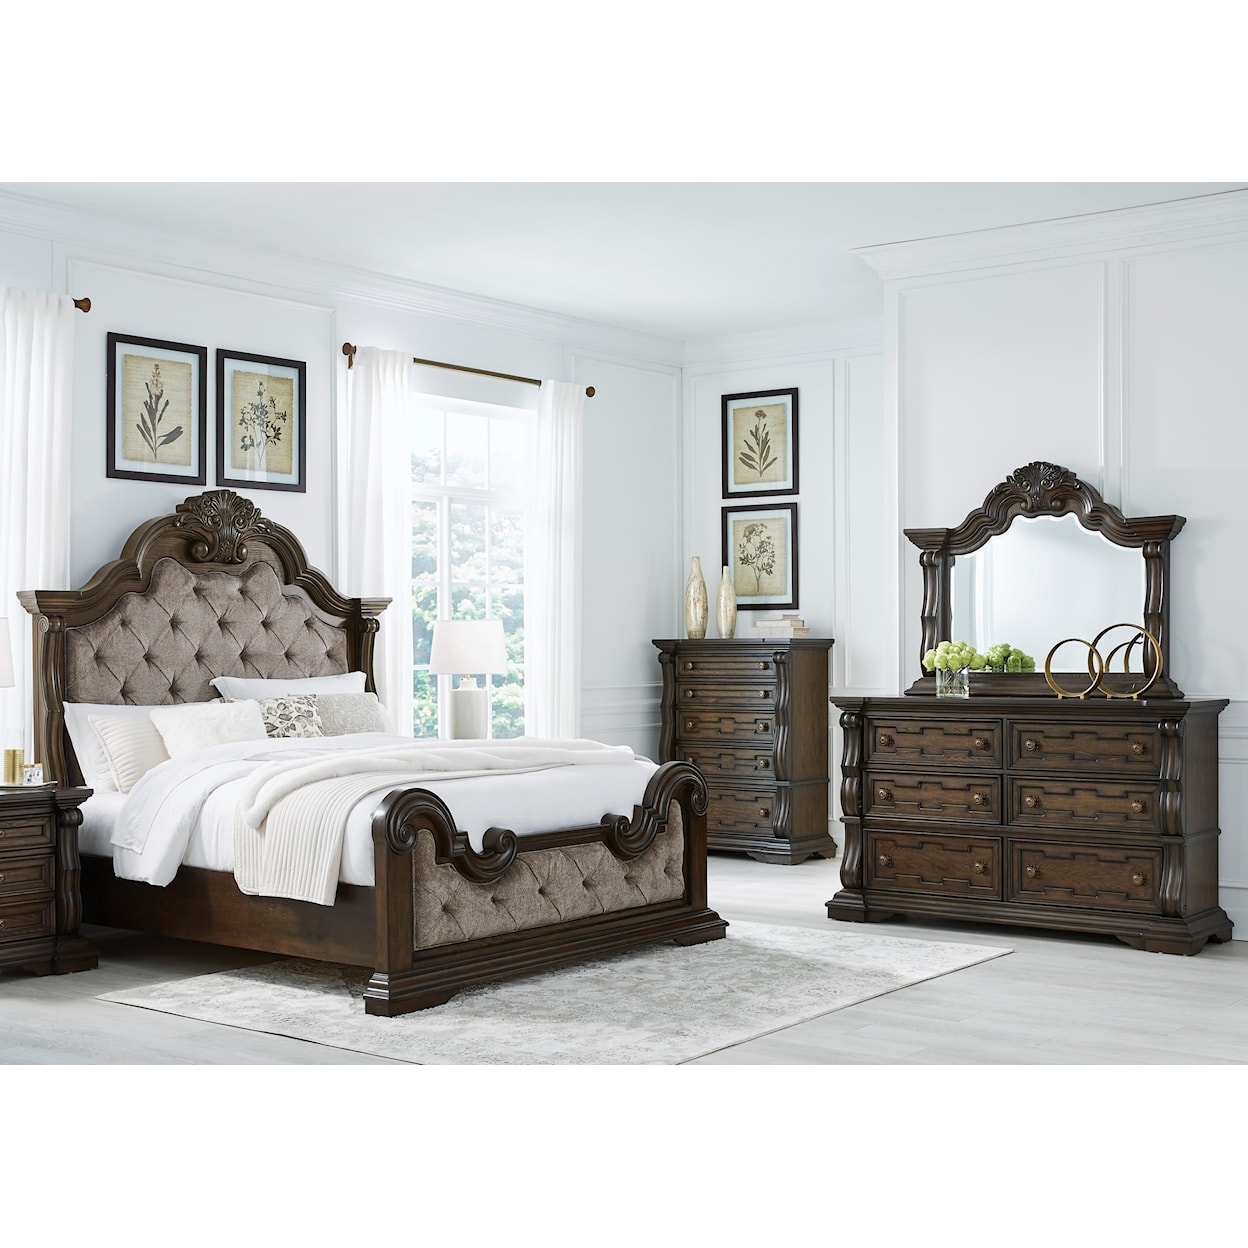 Signature Design by Ashley Maylee Queen Bedroom Group